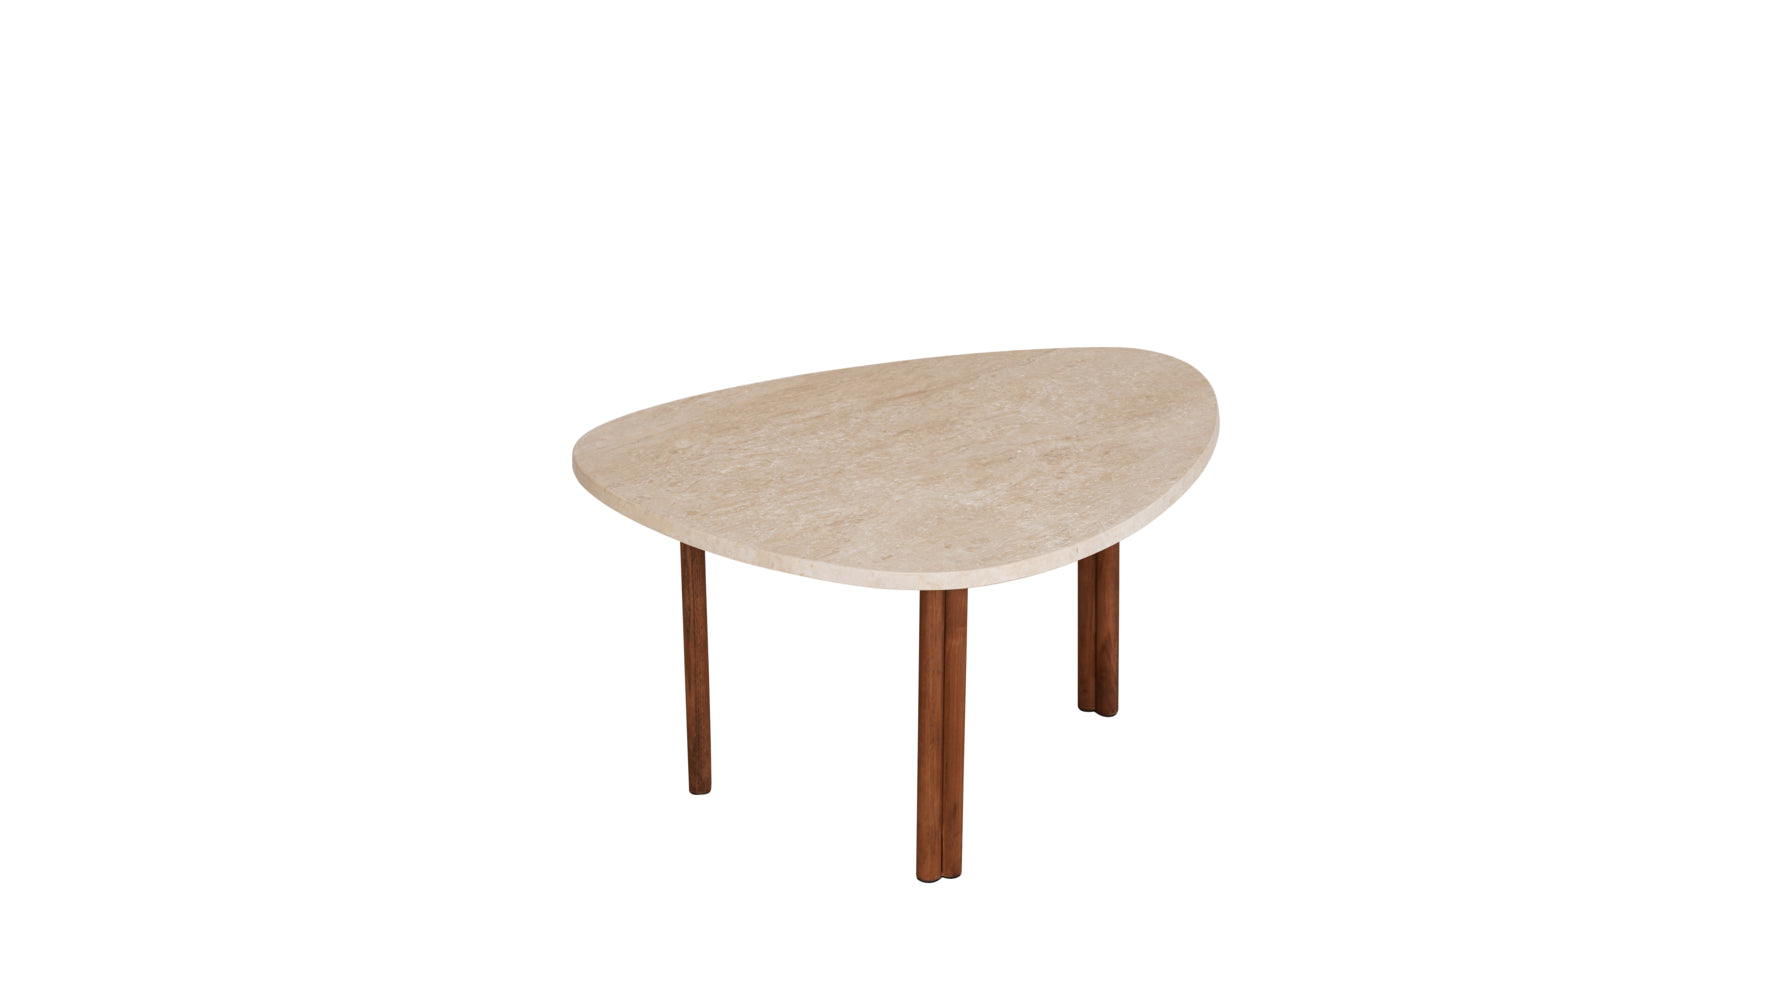 Better Together Coffee Table, Small, Beige Travertine/Walnut Stained Ash - Image 3